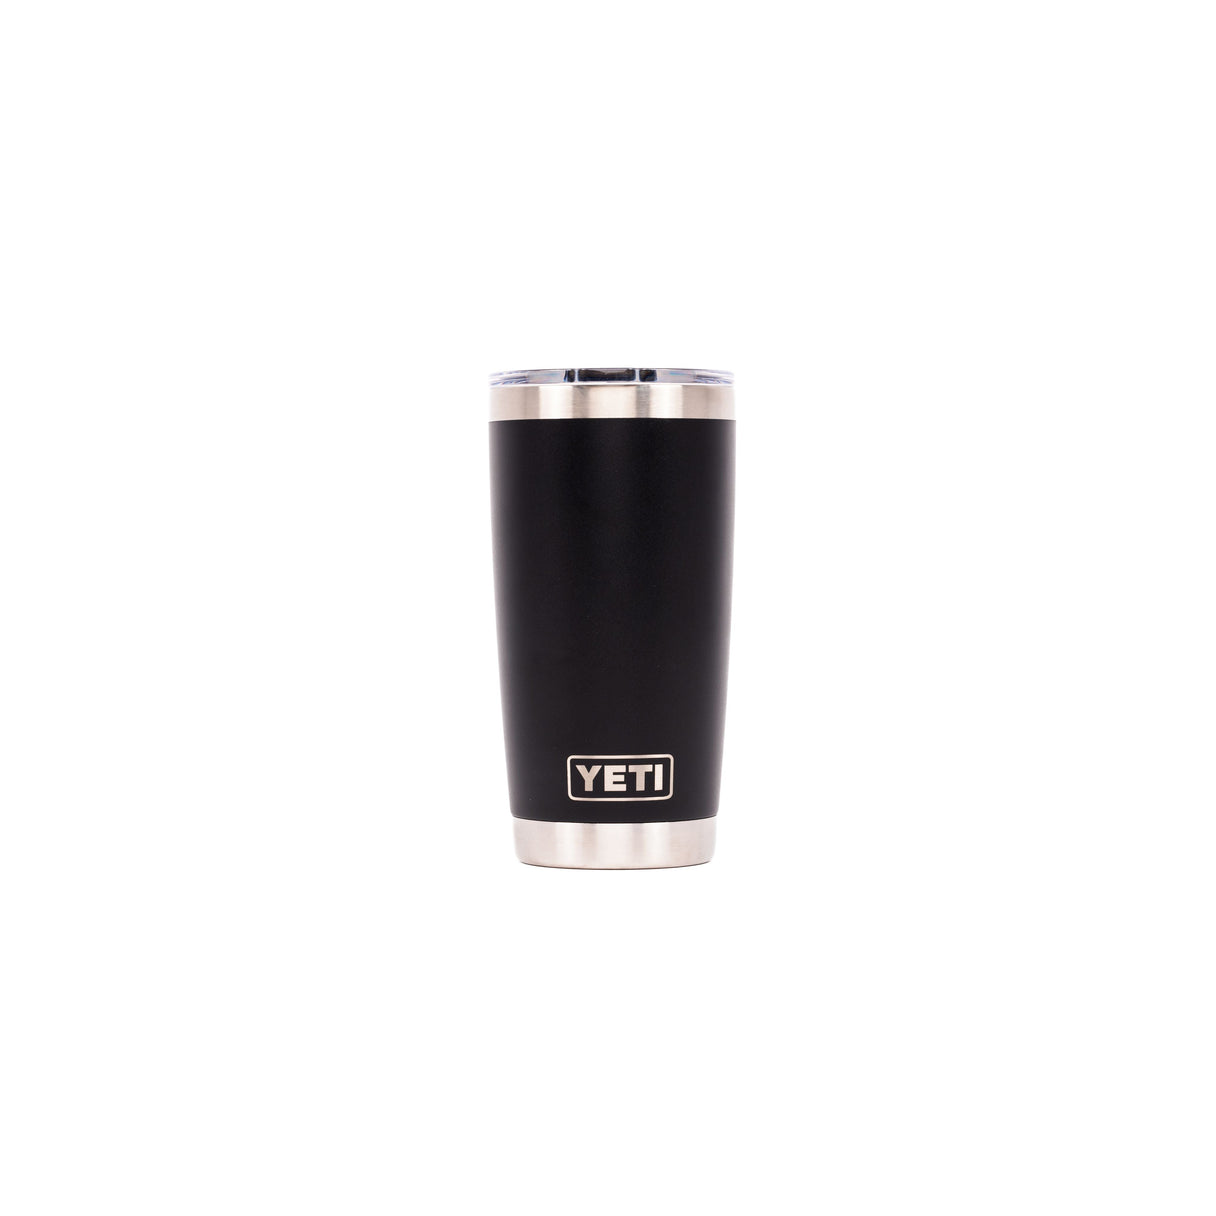 Yeti Stainless Steel Rambler 20 oz and 30 oz Coffee Tumblers with Lids Lot  of 2